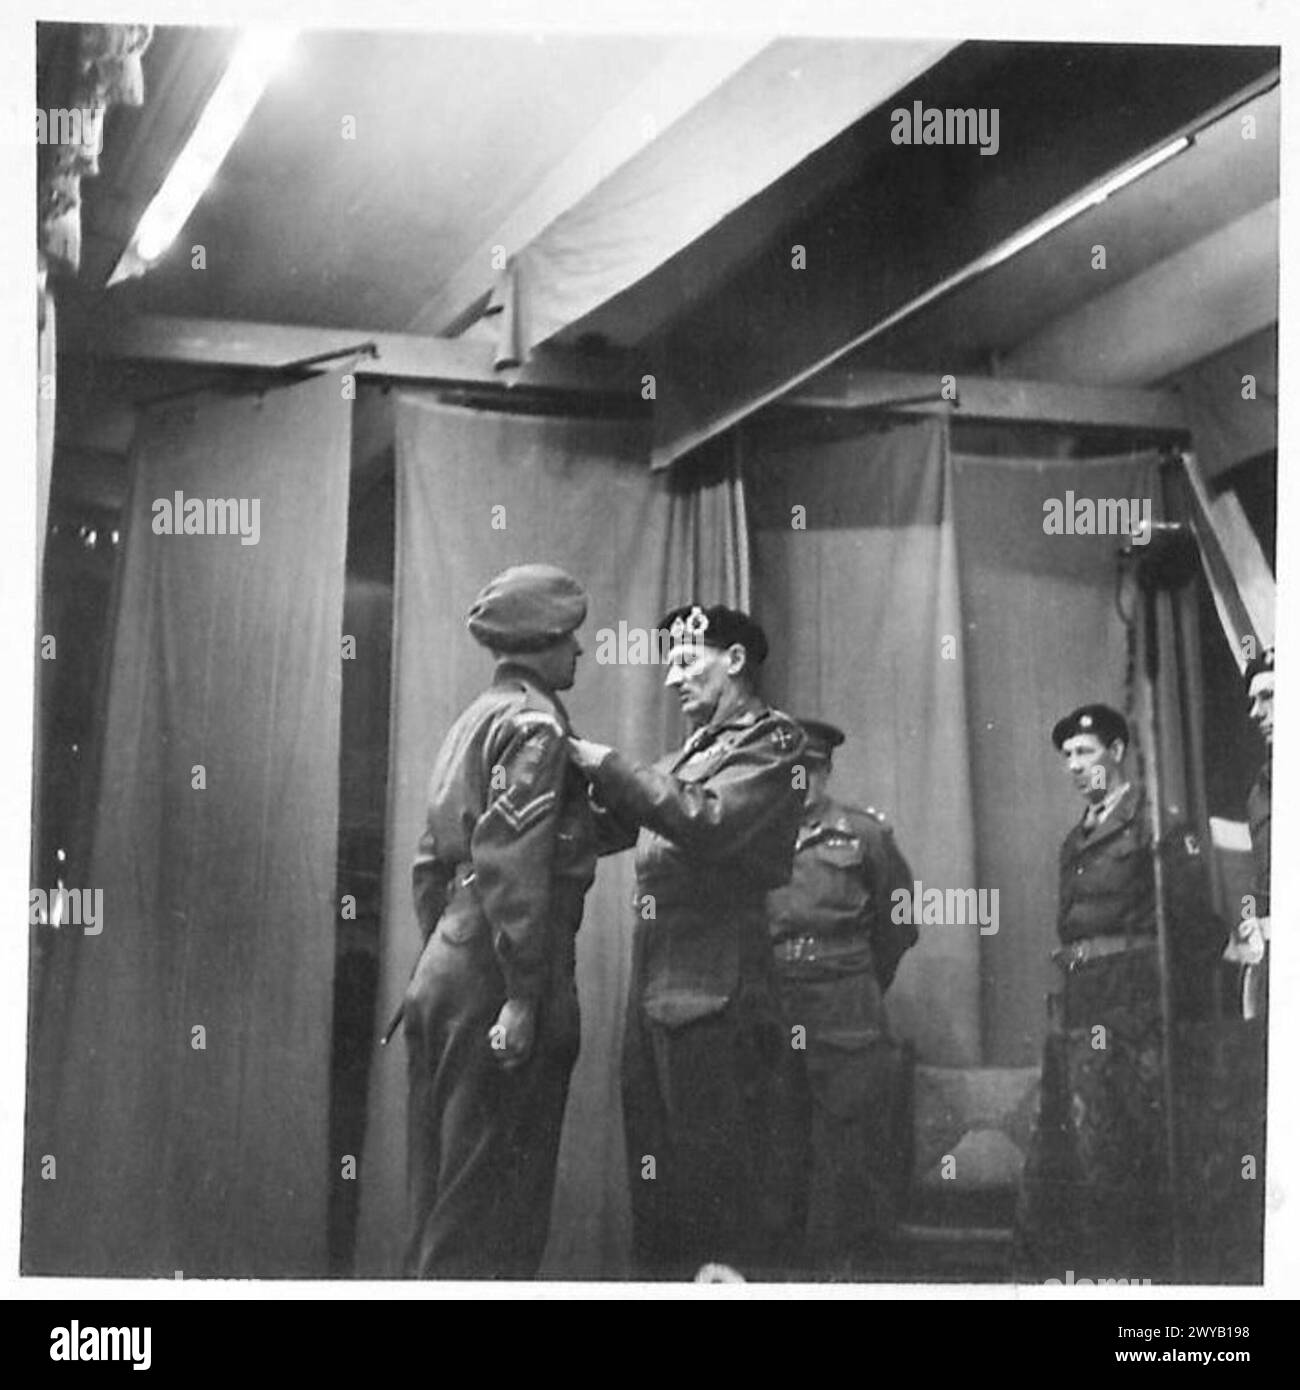 FIELD-MARSHAL MONTGOMERY AT INVESTITURE/53 (WELCH) DIV INVESTITURE AT ..., HOLLAND - Original wartime caption: Cpl. G. Evans, 4 Welsh Regt, receives the MM. Photographic negative , British Army, 21st Army Group Stock Photo